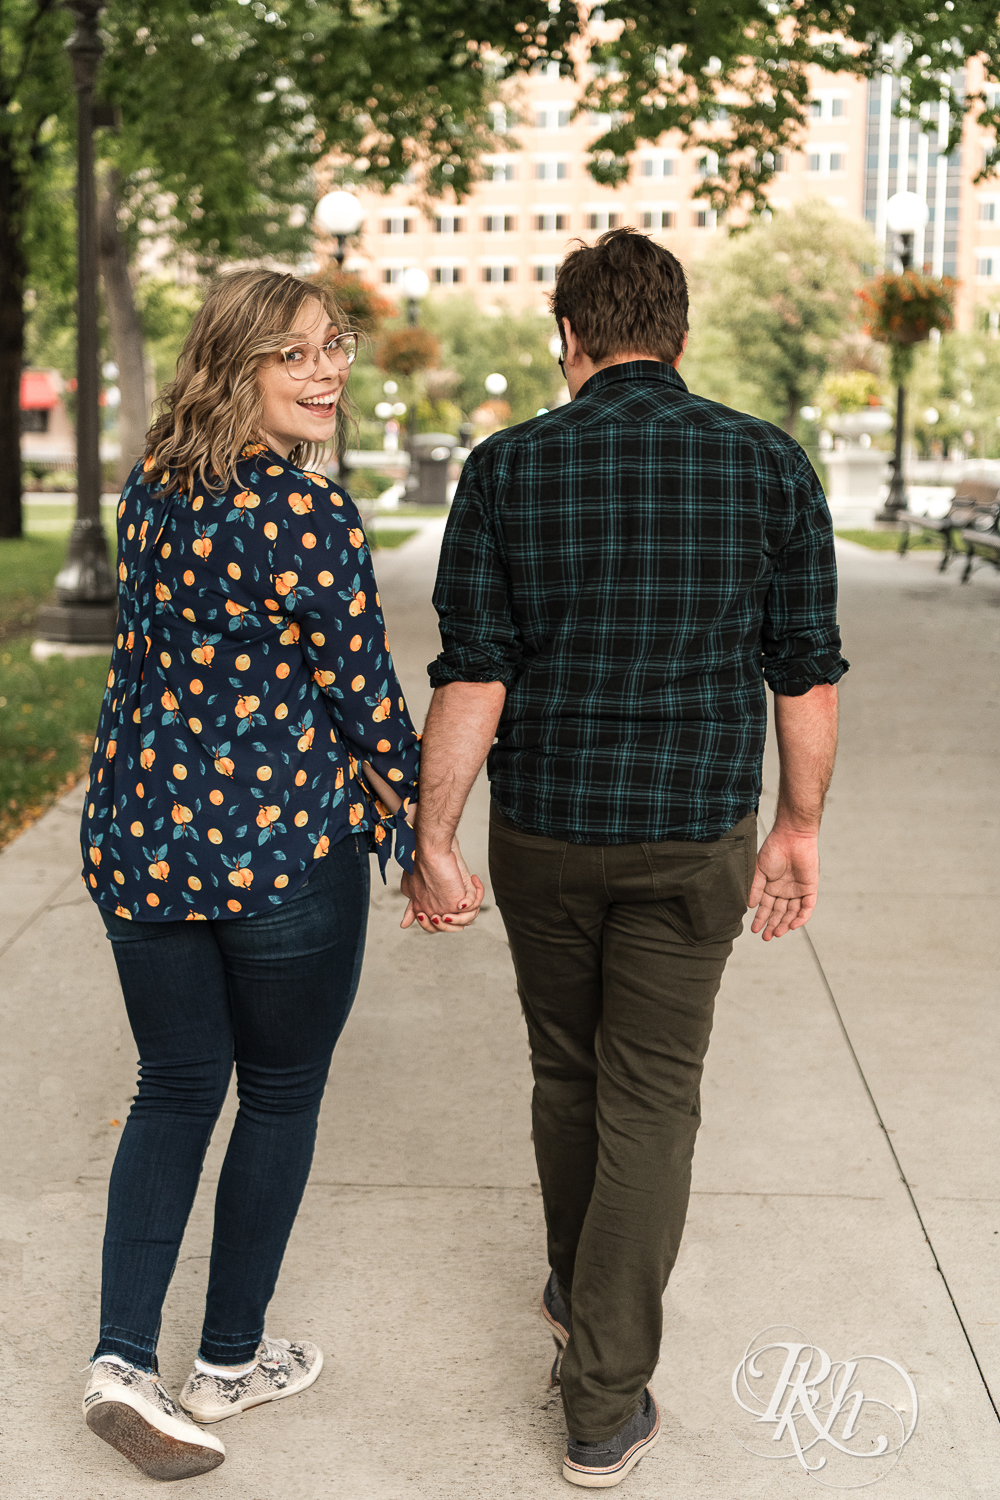 Blond woman with glasses and man with glasses walk on sidewalk in Saint Paul, Minnesota.